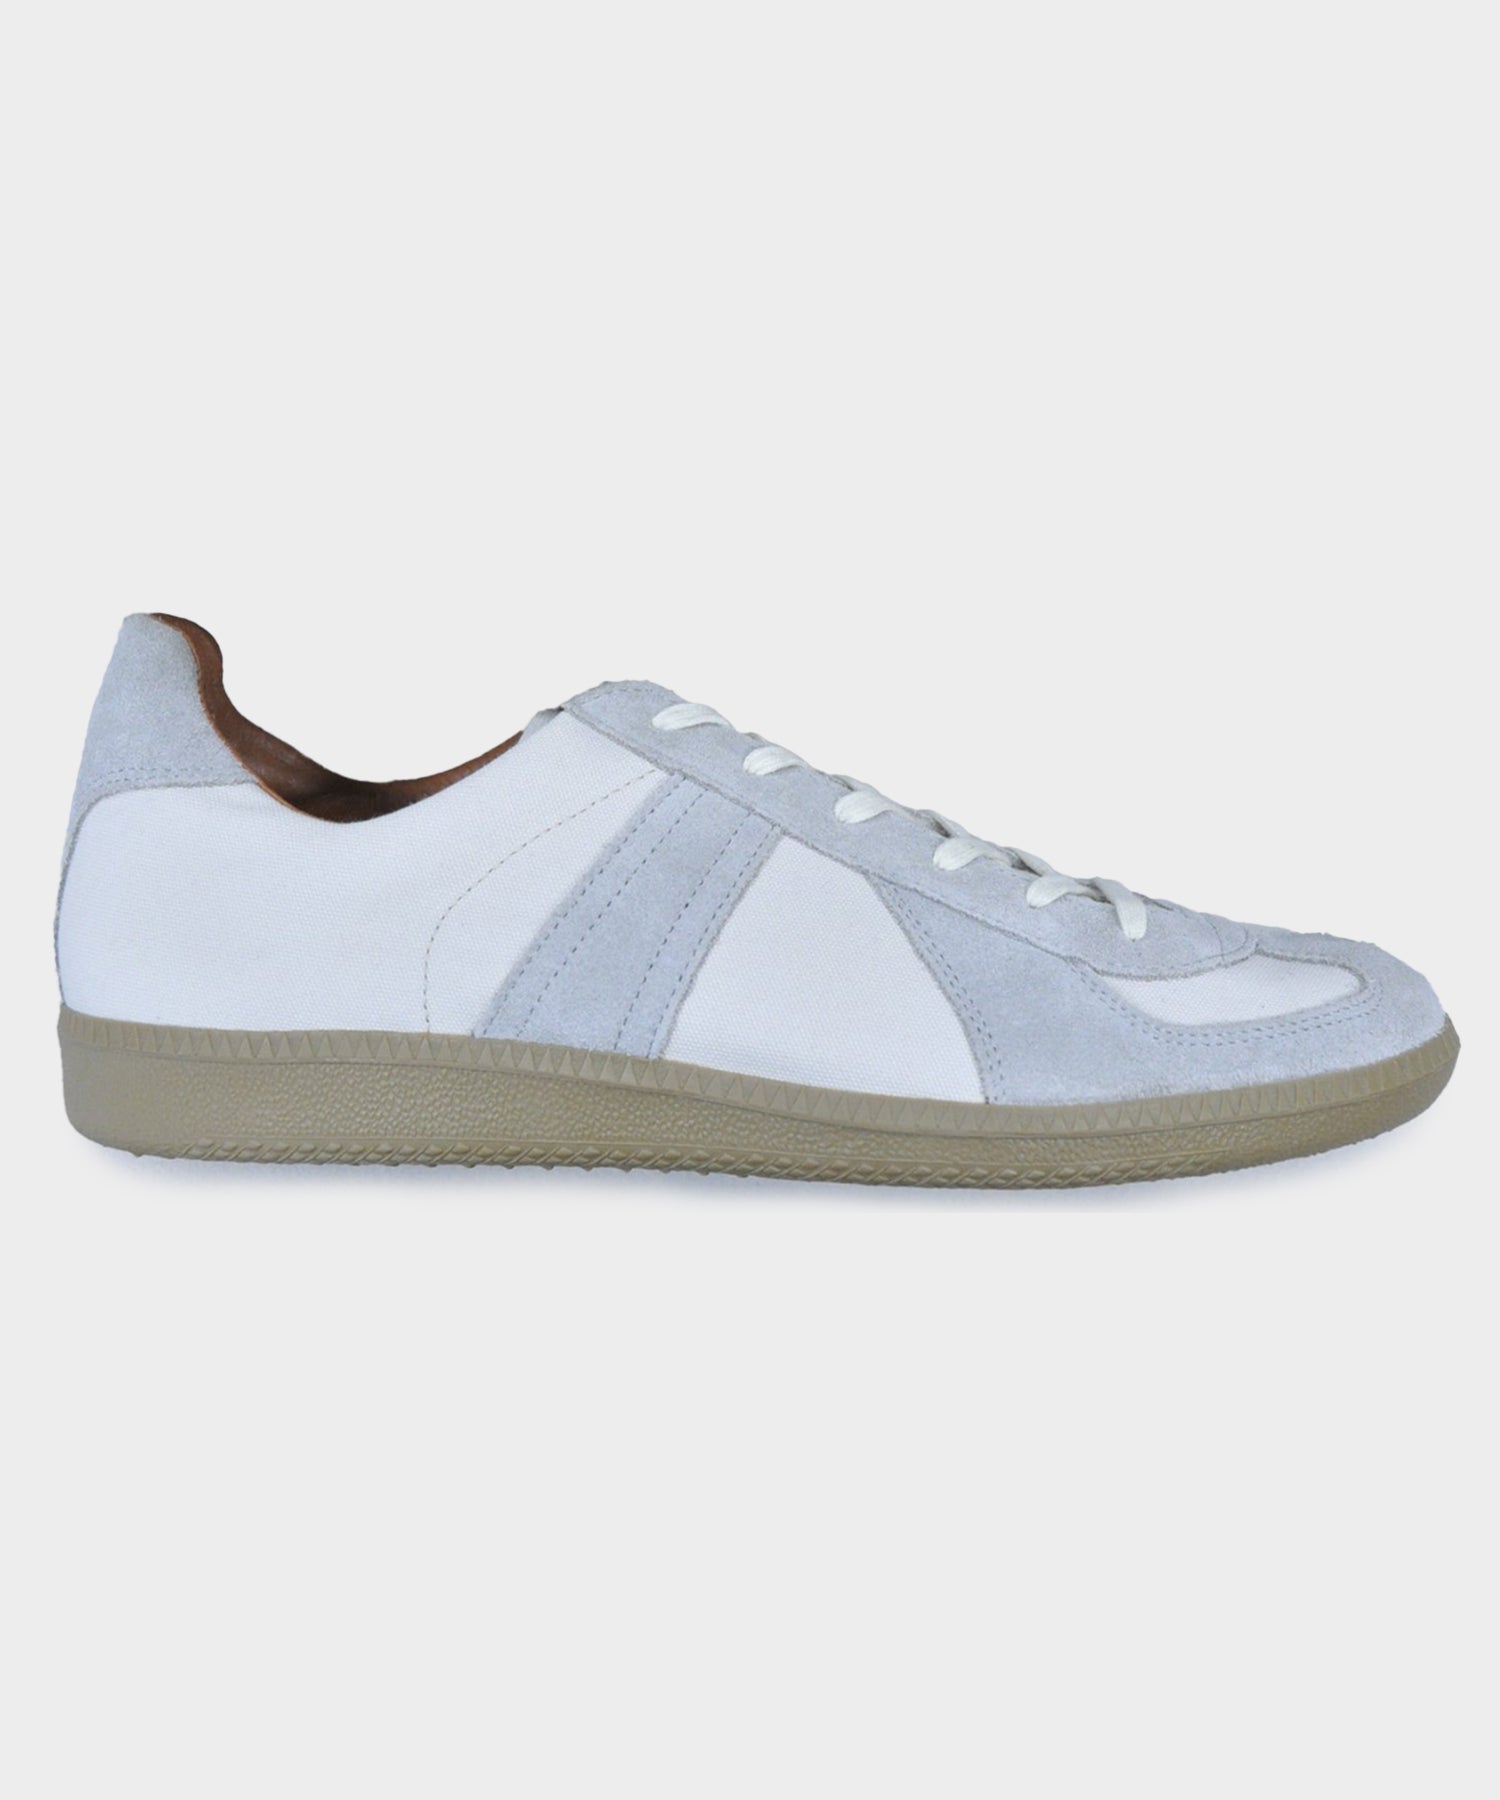 Reproduction of Found German Military Trainers in White Stone